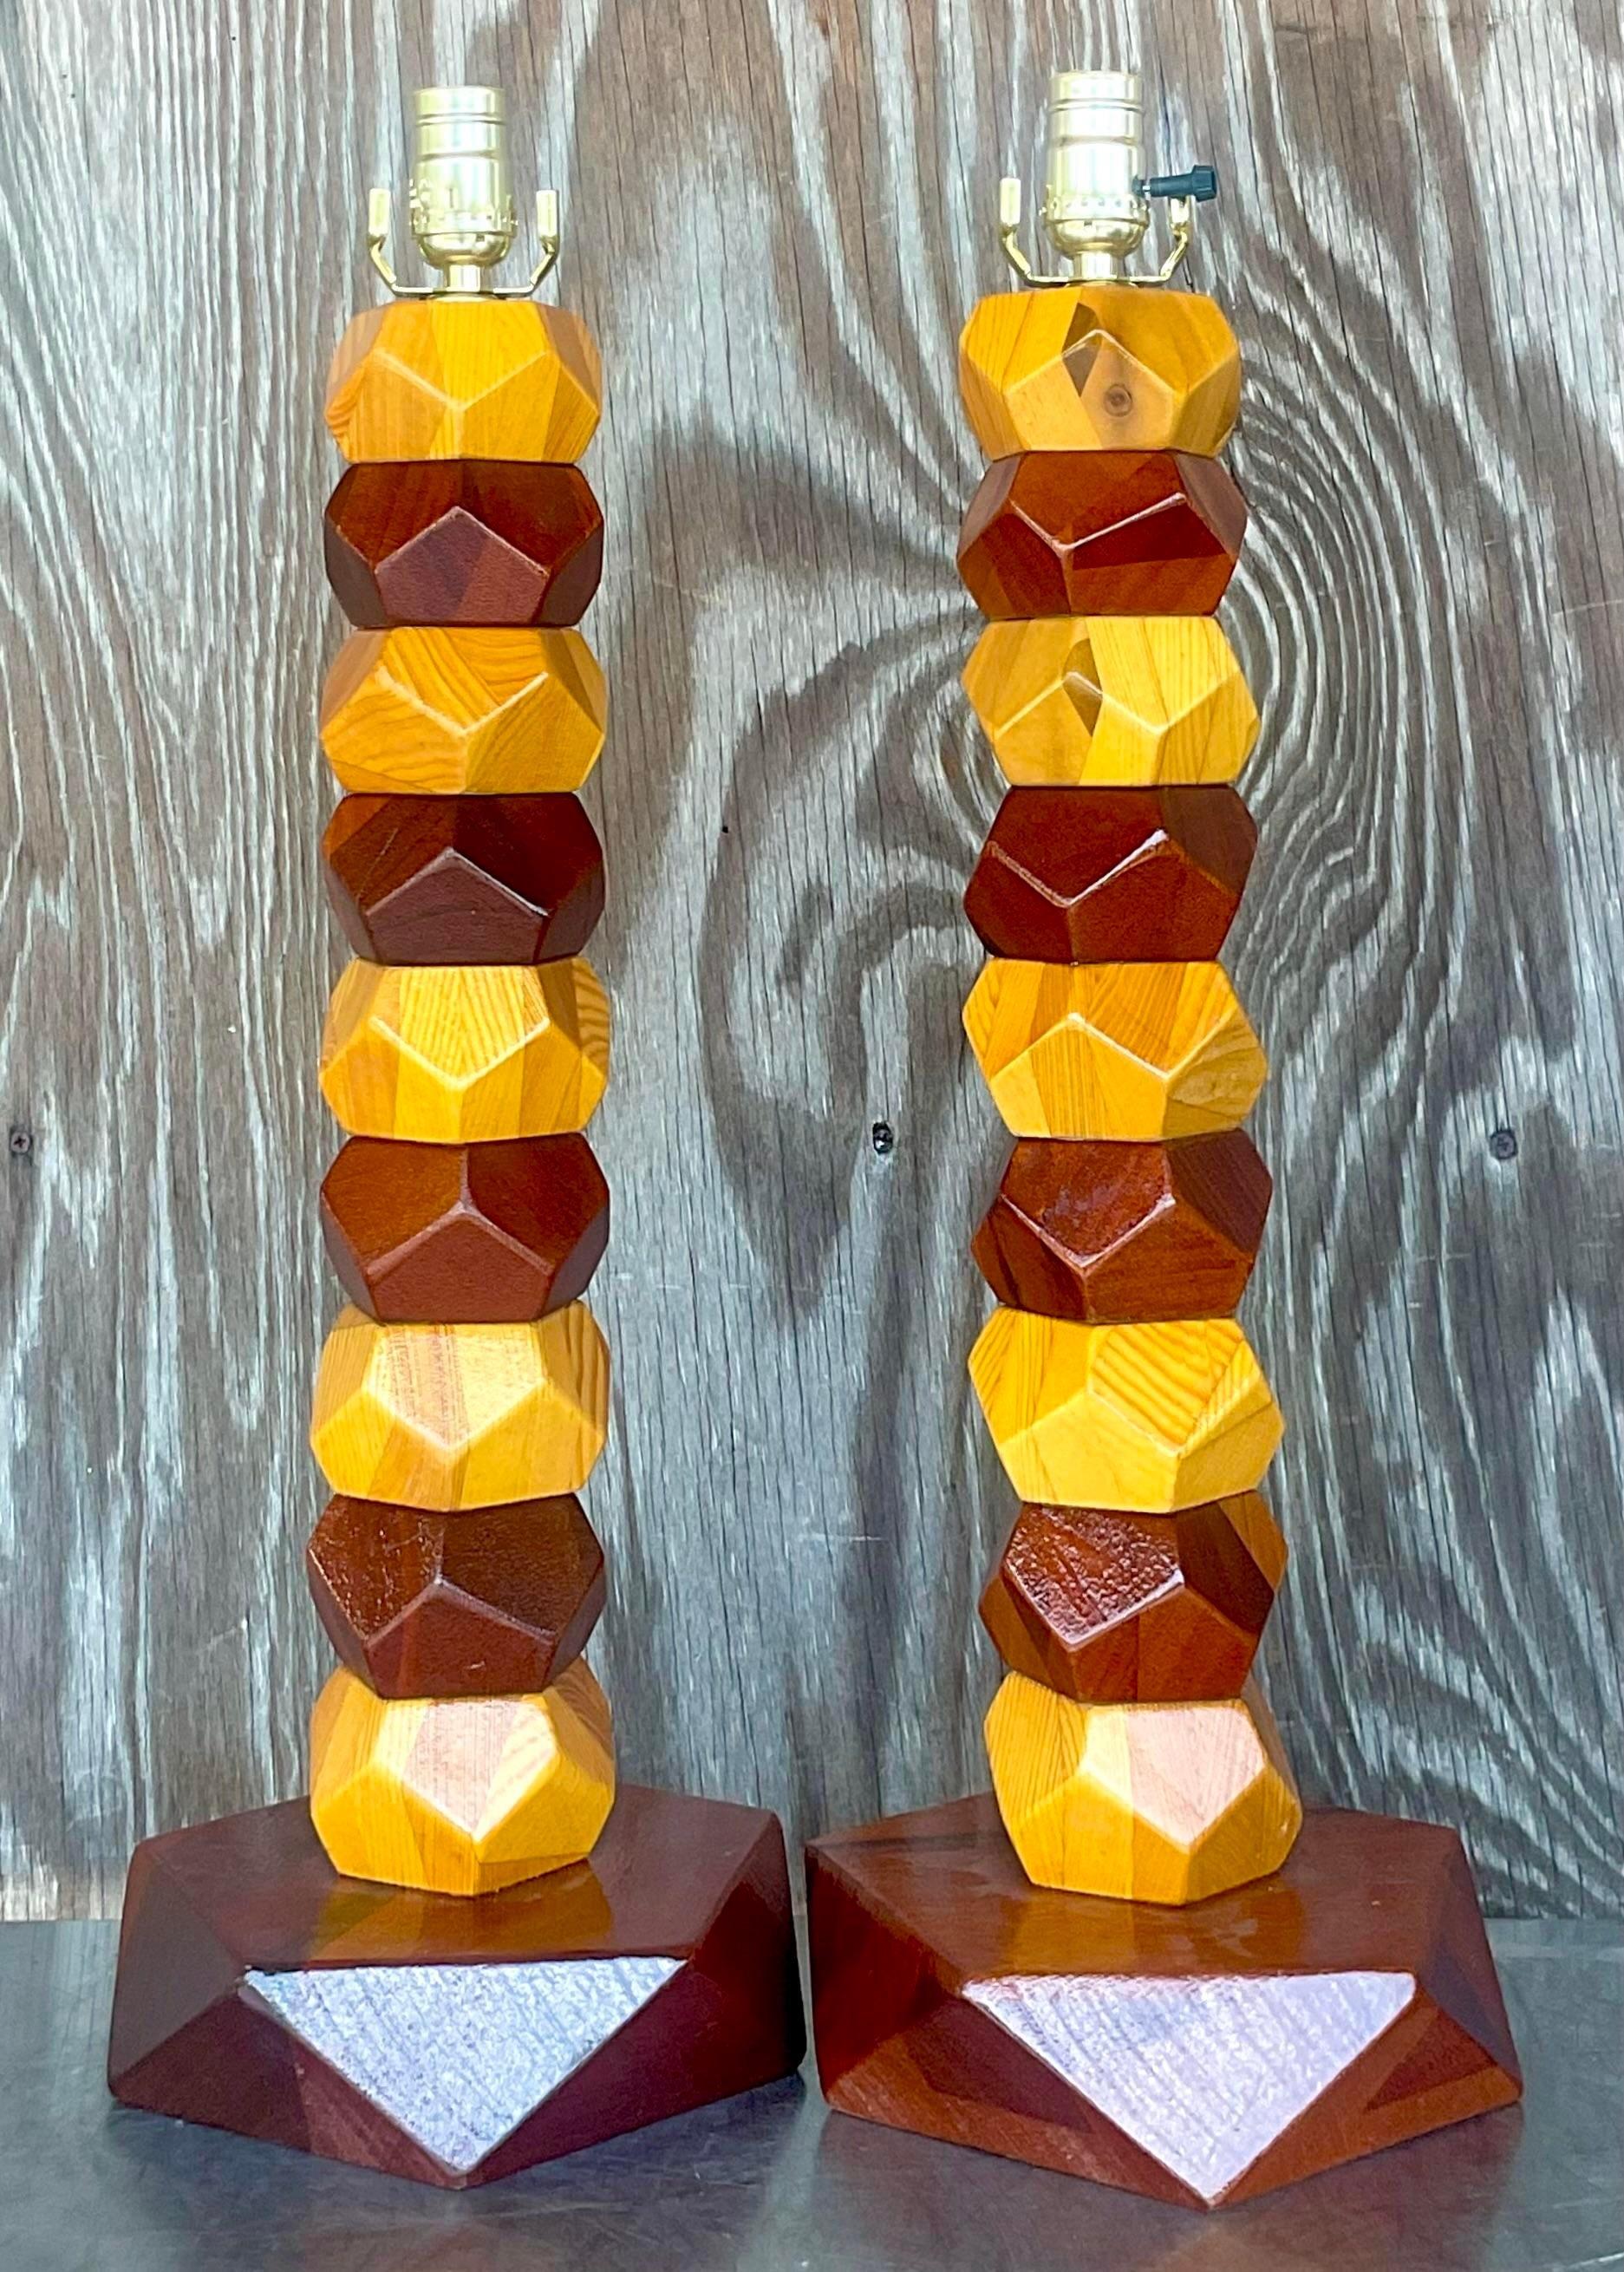 Vintage Boho Stacked Faceted Wood Block Lamps - a Pair For Sale 1